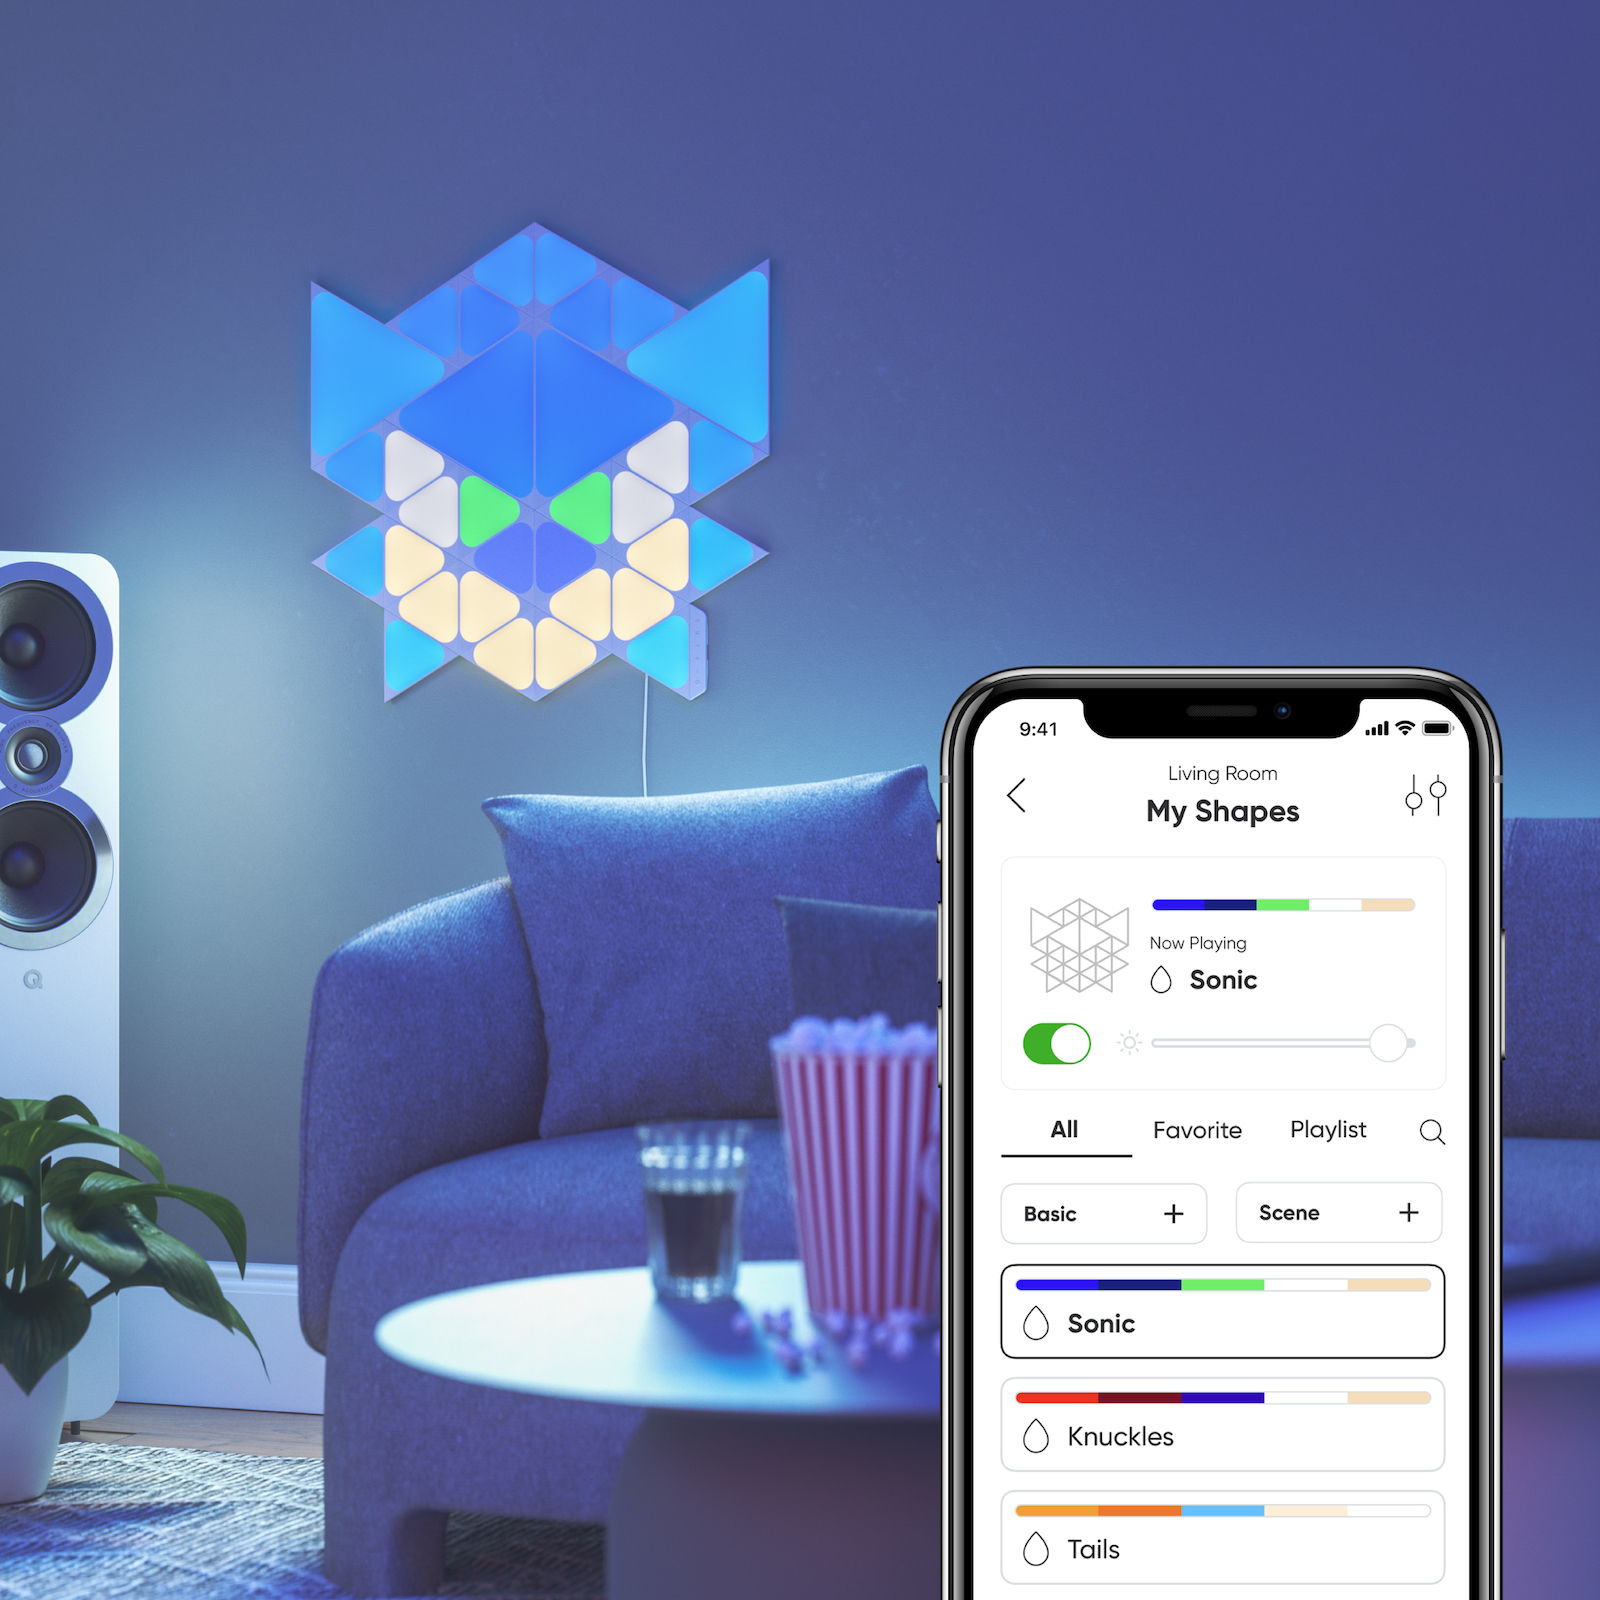 Nanoleaf Shapes Thread enabled color changing triangle and mini triangle smart modular light panels mounted to a wall in a living room as Sonic. Sonic the Hedgehog 2. Nanoleaf App. Similar to Philips Hue, Lifx. HomeKit, Google Assistant, Amazon Alexa, IFTTT.